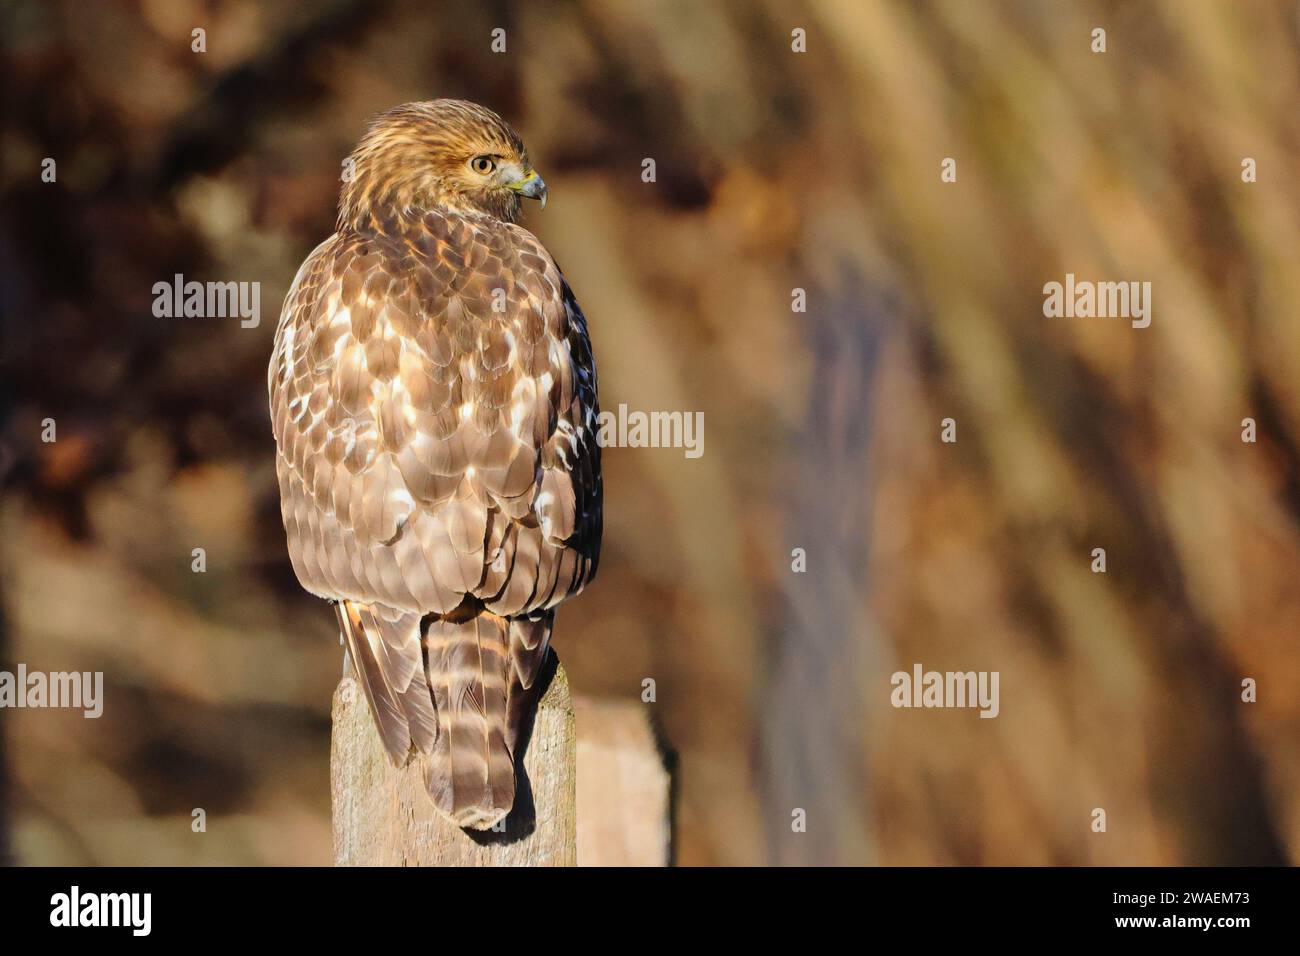 A majestic hawk is perched atop a wooden fence post, its head held high as it surveys its surroundings Stock Photo